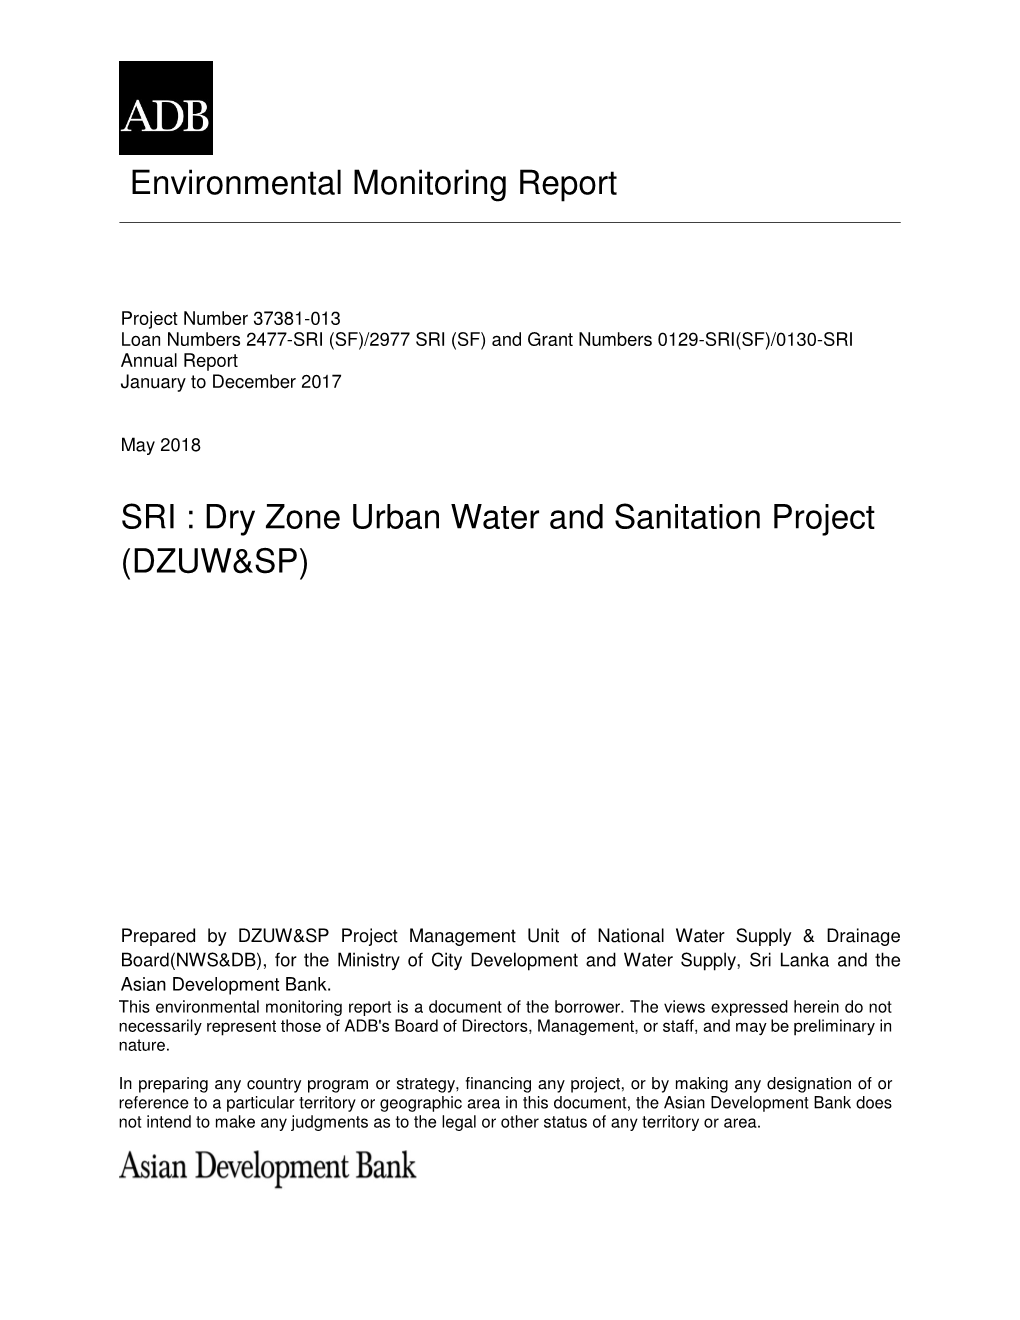 Dry Zone Urban Water and Sanitation Project (DZUW&SP)